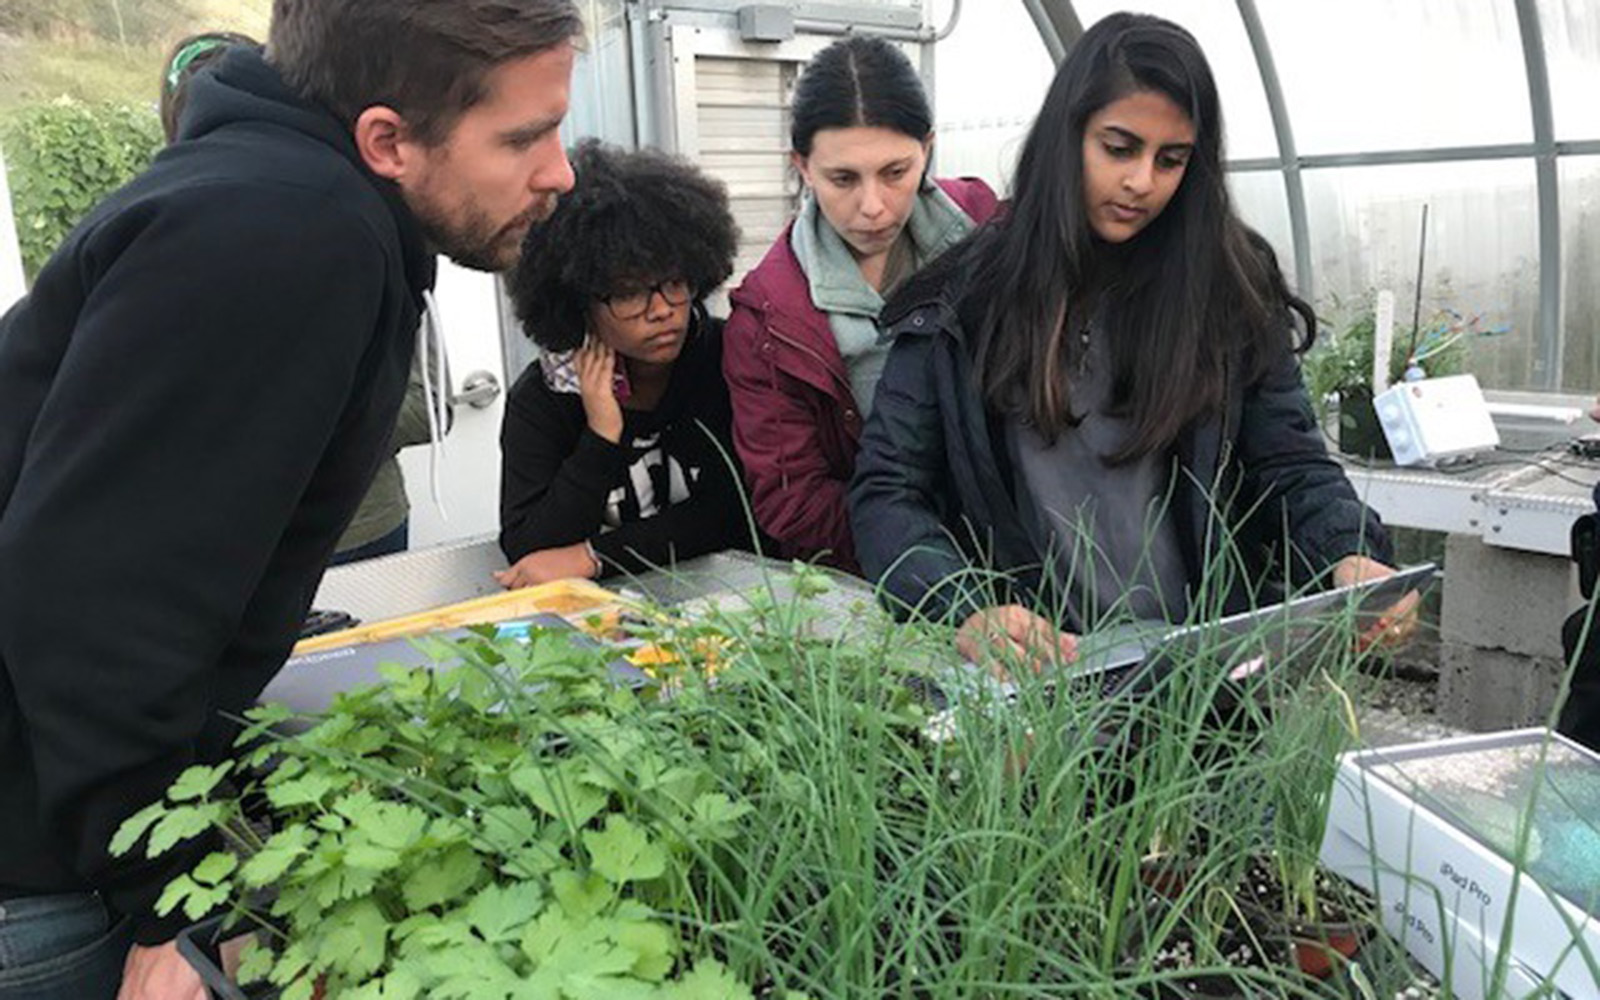 Adjunct professor Ryan O’Connor consults students enrolled in an Internet of Things course that uses emerging technology to improve plant life at UConn’s Spring Valley Farm. Students, from left, are Nicole Hamilton '19 (BUS), Tara Watrous '19 (CLAS), and Radhika Kanaskar '18 (BUS). (Claire Hall/UConn School of Business)